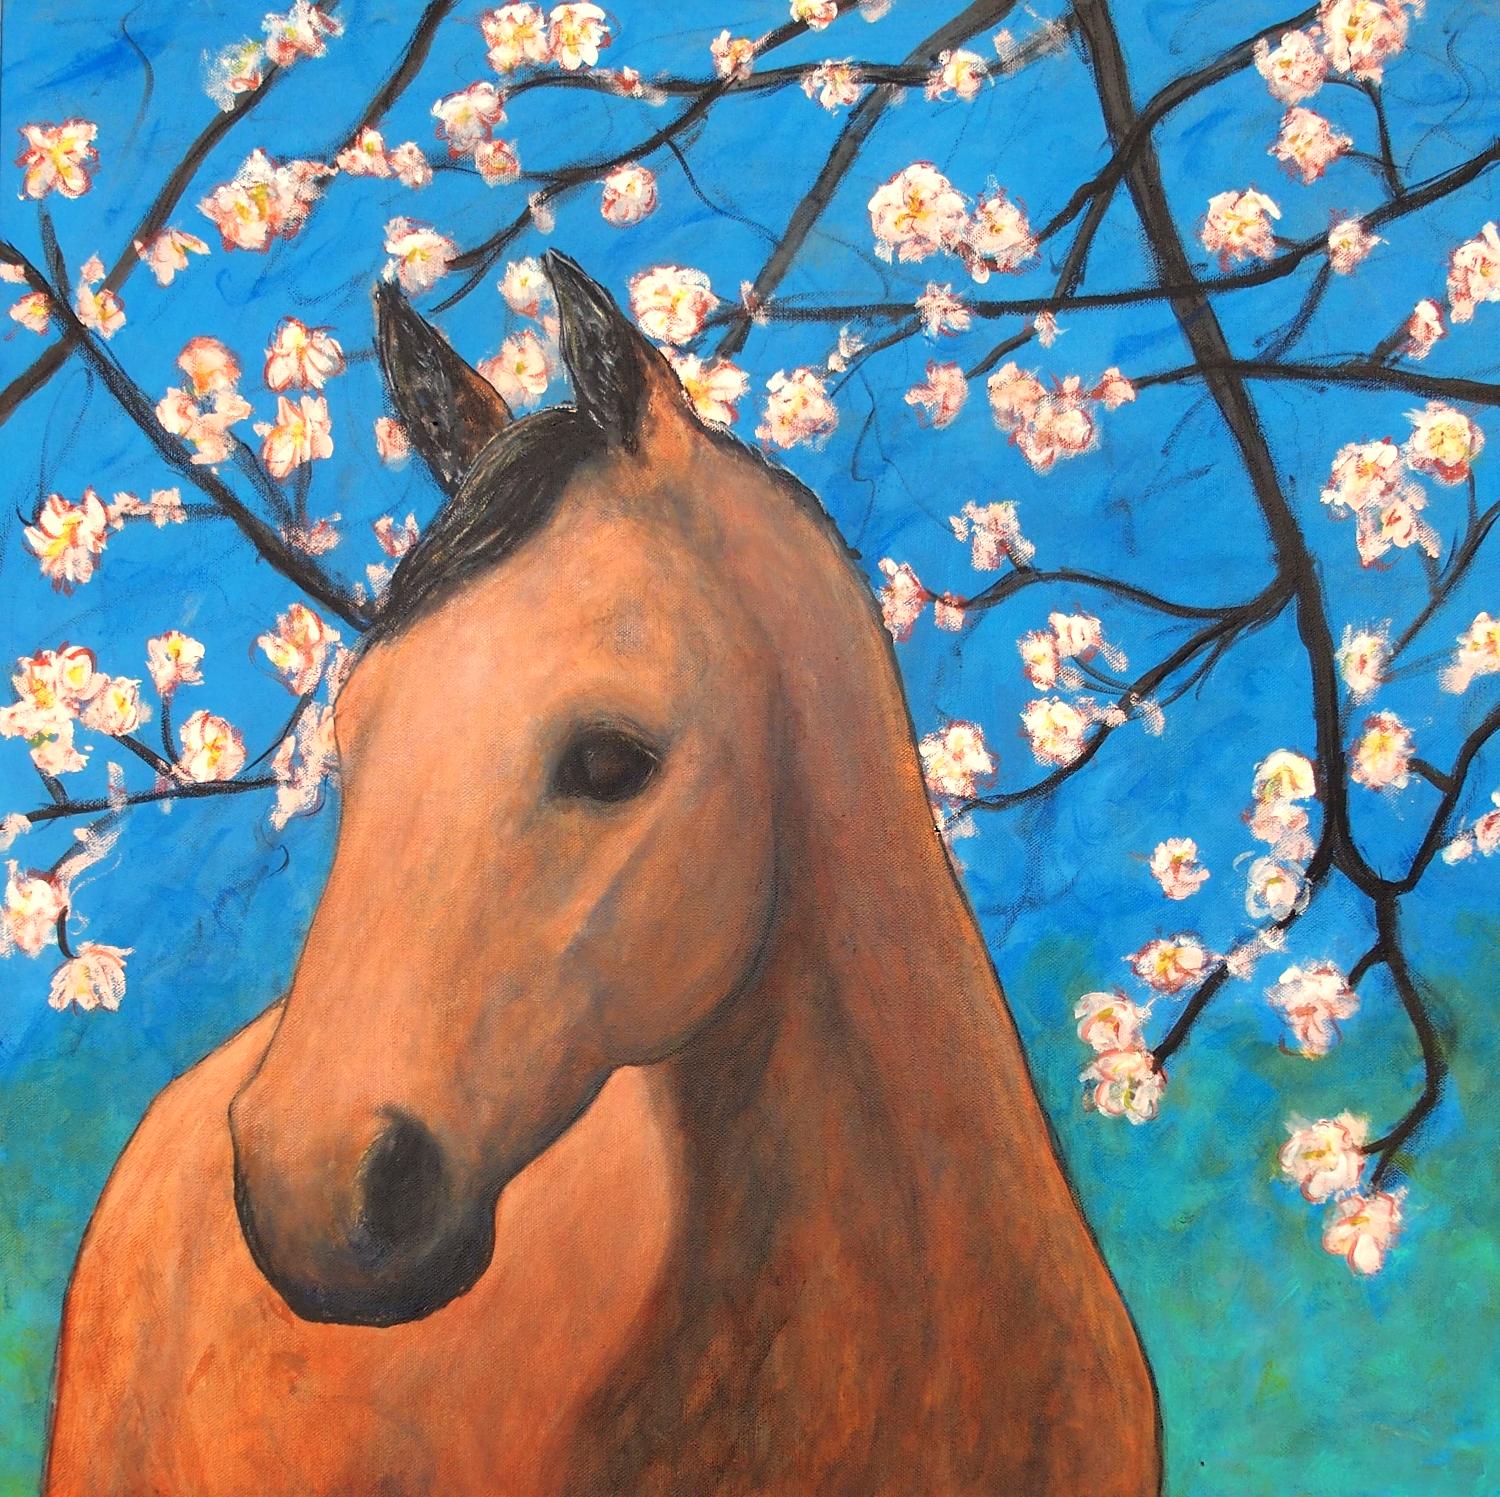 To Be Alive Beneath Cherry Blossoms, Original Painting